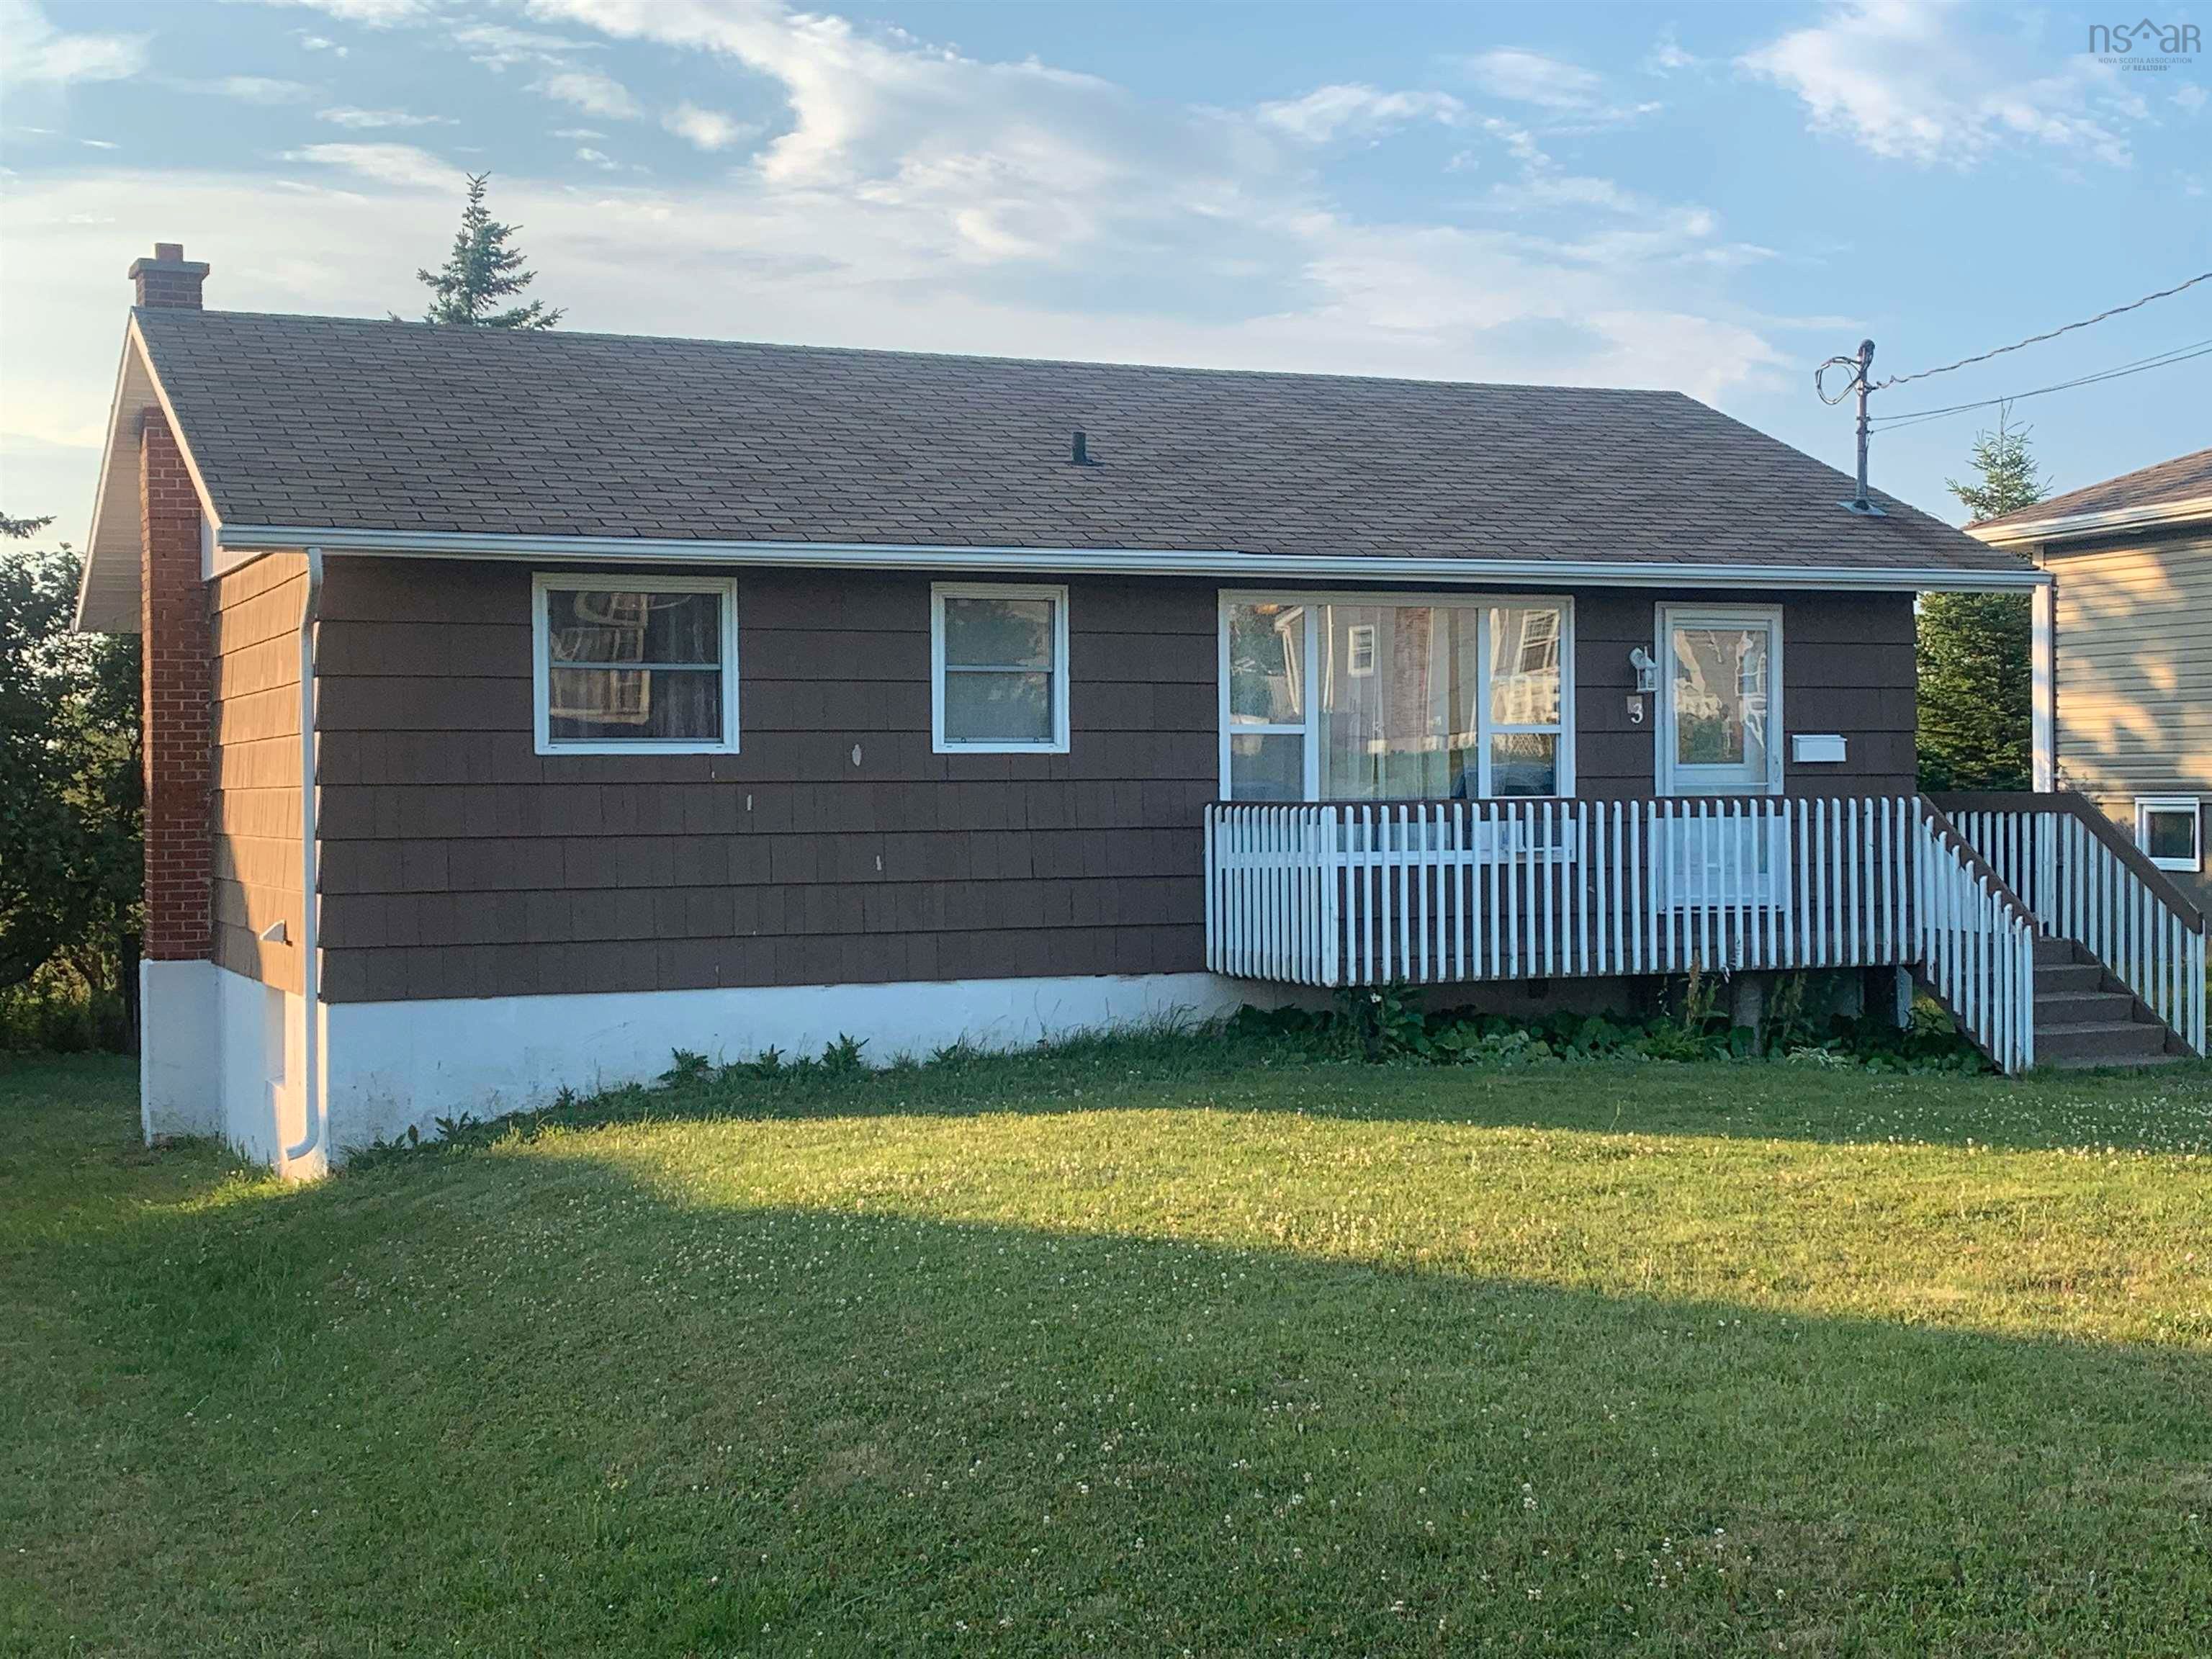 Main Photo: 3 Seventh Street in Glace Bay: 203-Glace Bay Residential for sale (Cape Breton)  : MLS®# 202218367